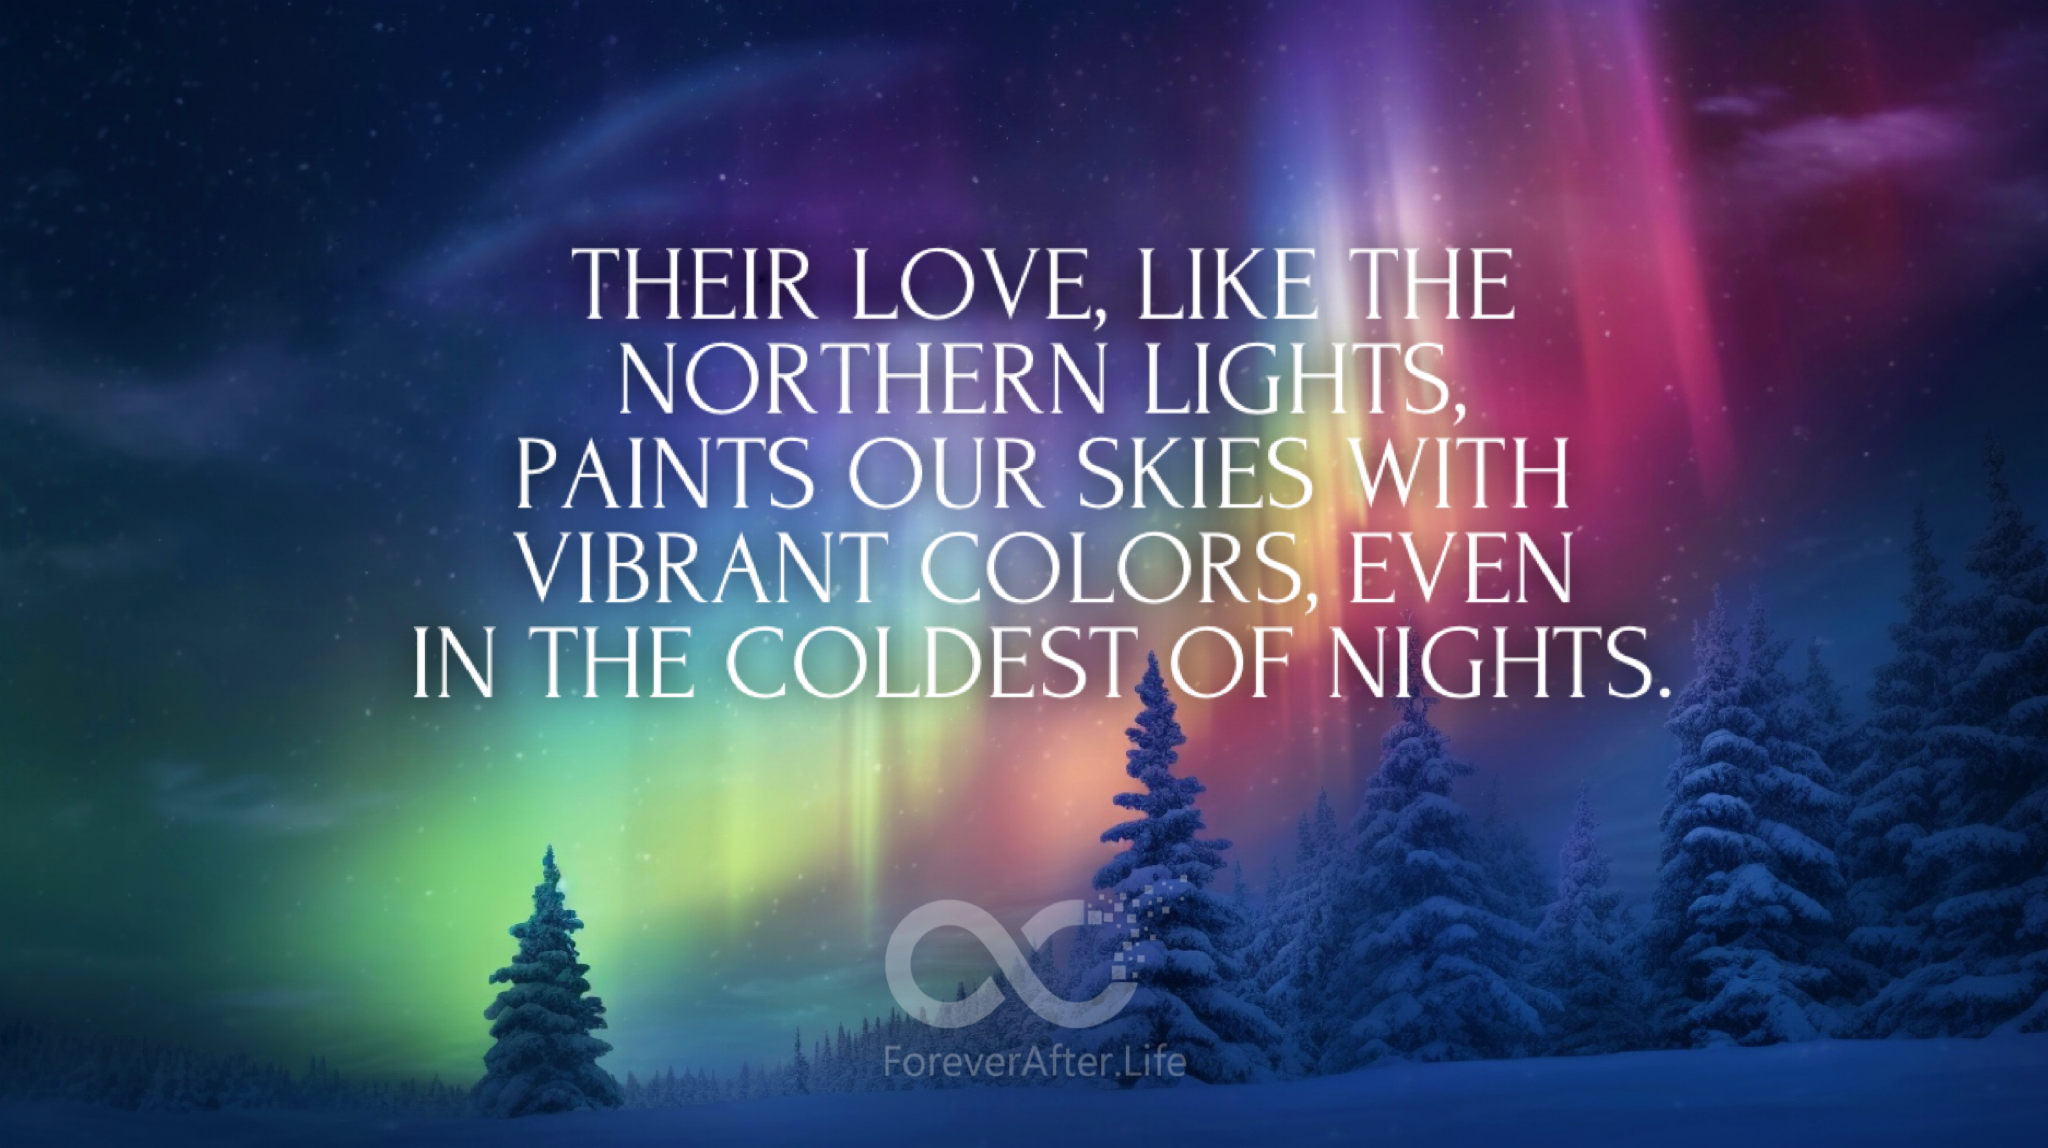 Their love, like the Northern Lights, paints our skies with vibrant colors, even in the coldest of nights.